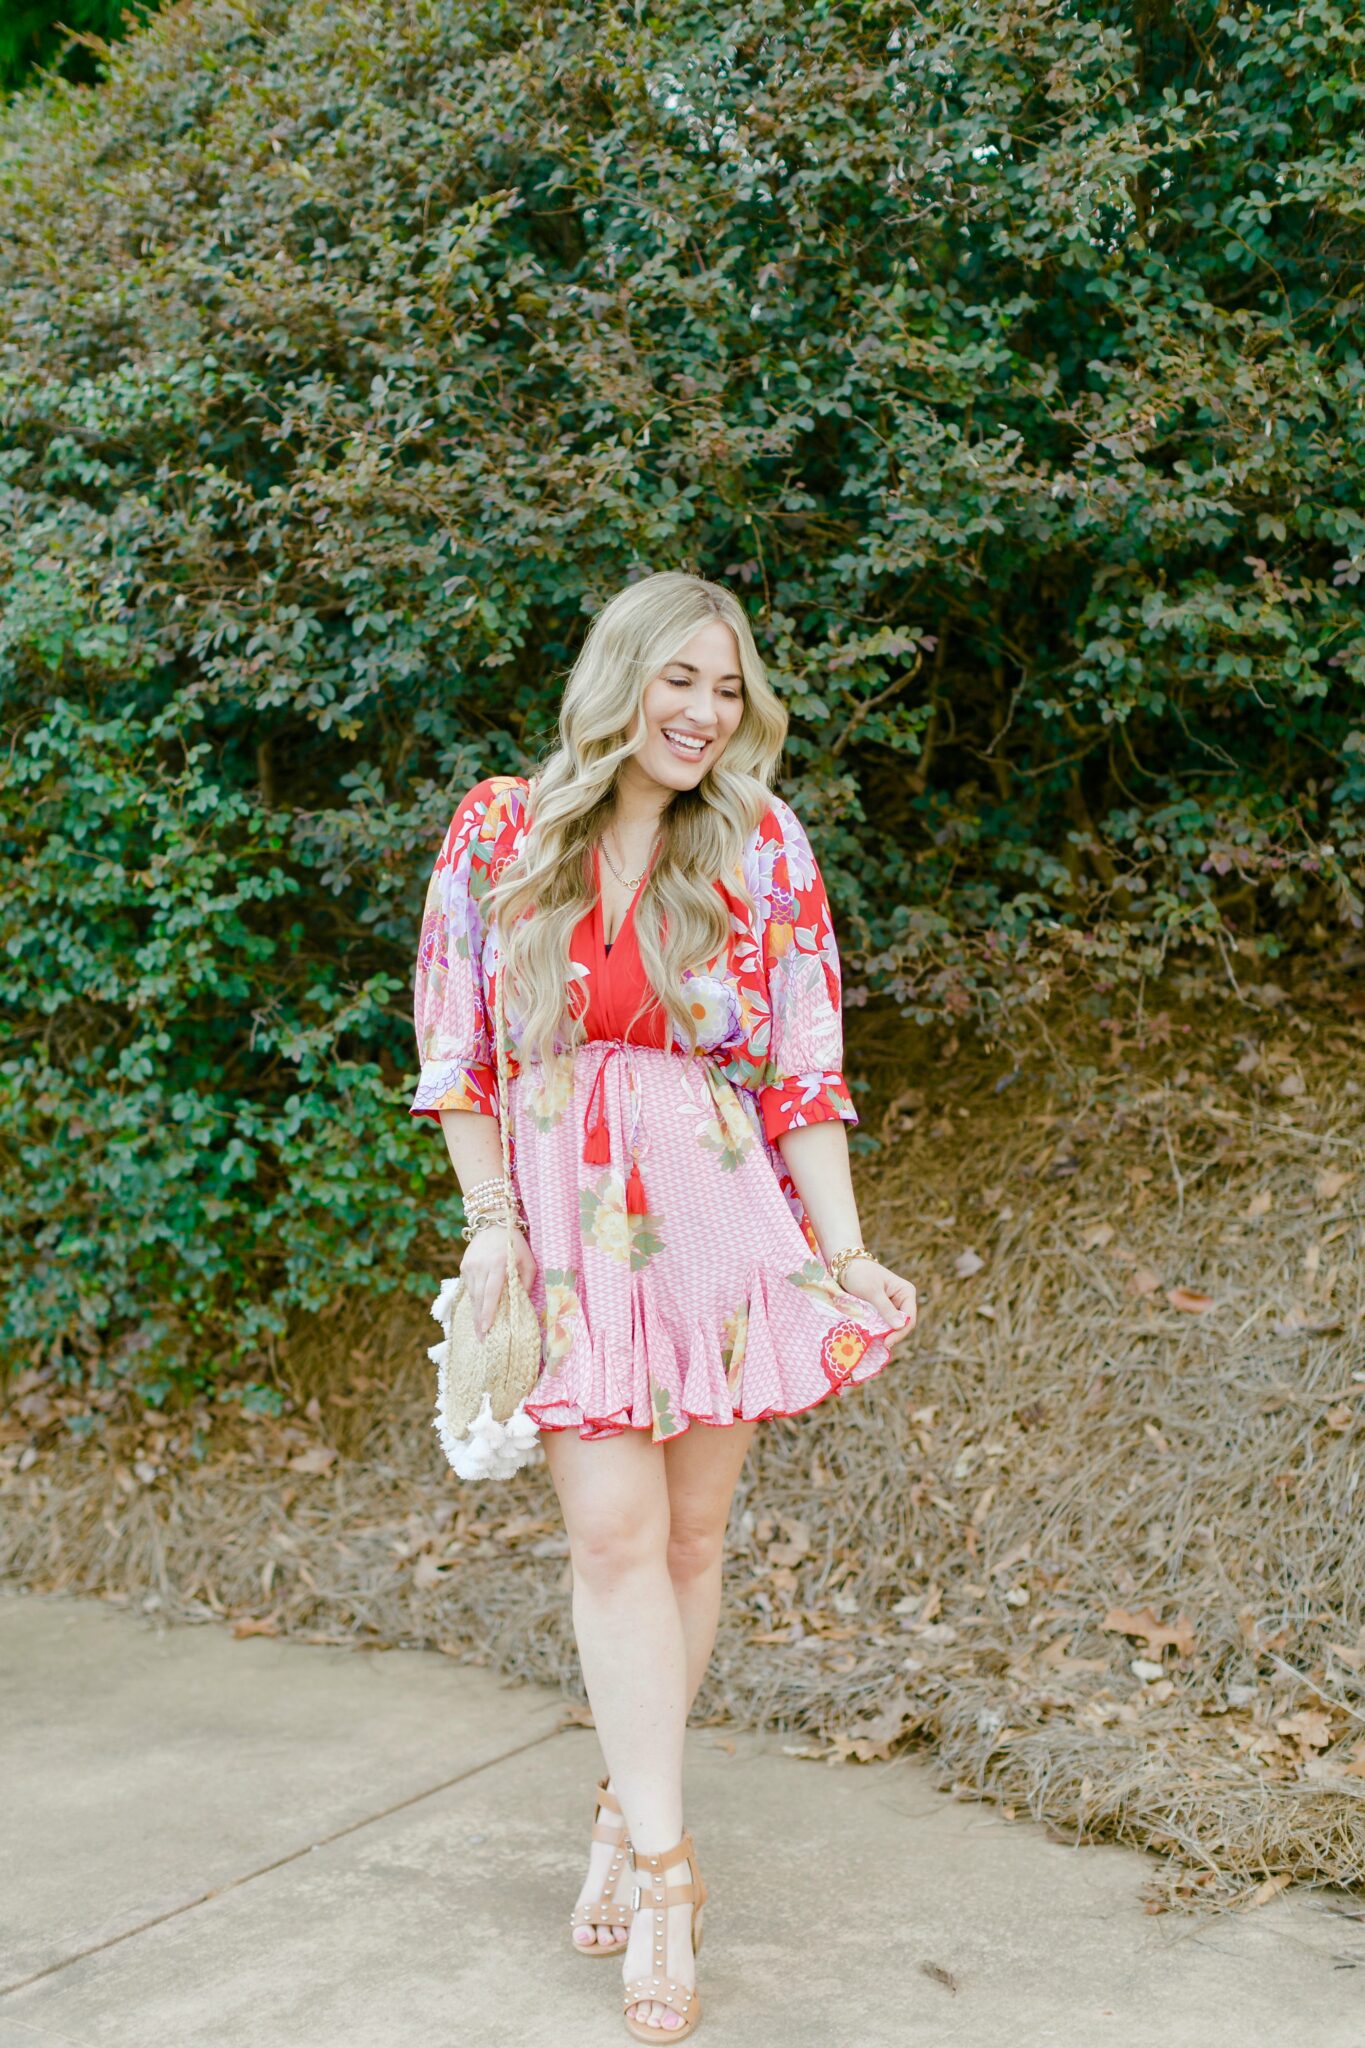 Spring Florals | Fashion - Walking in Memphis in High Heels